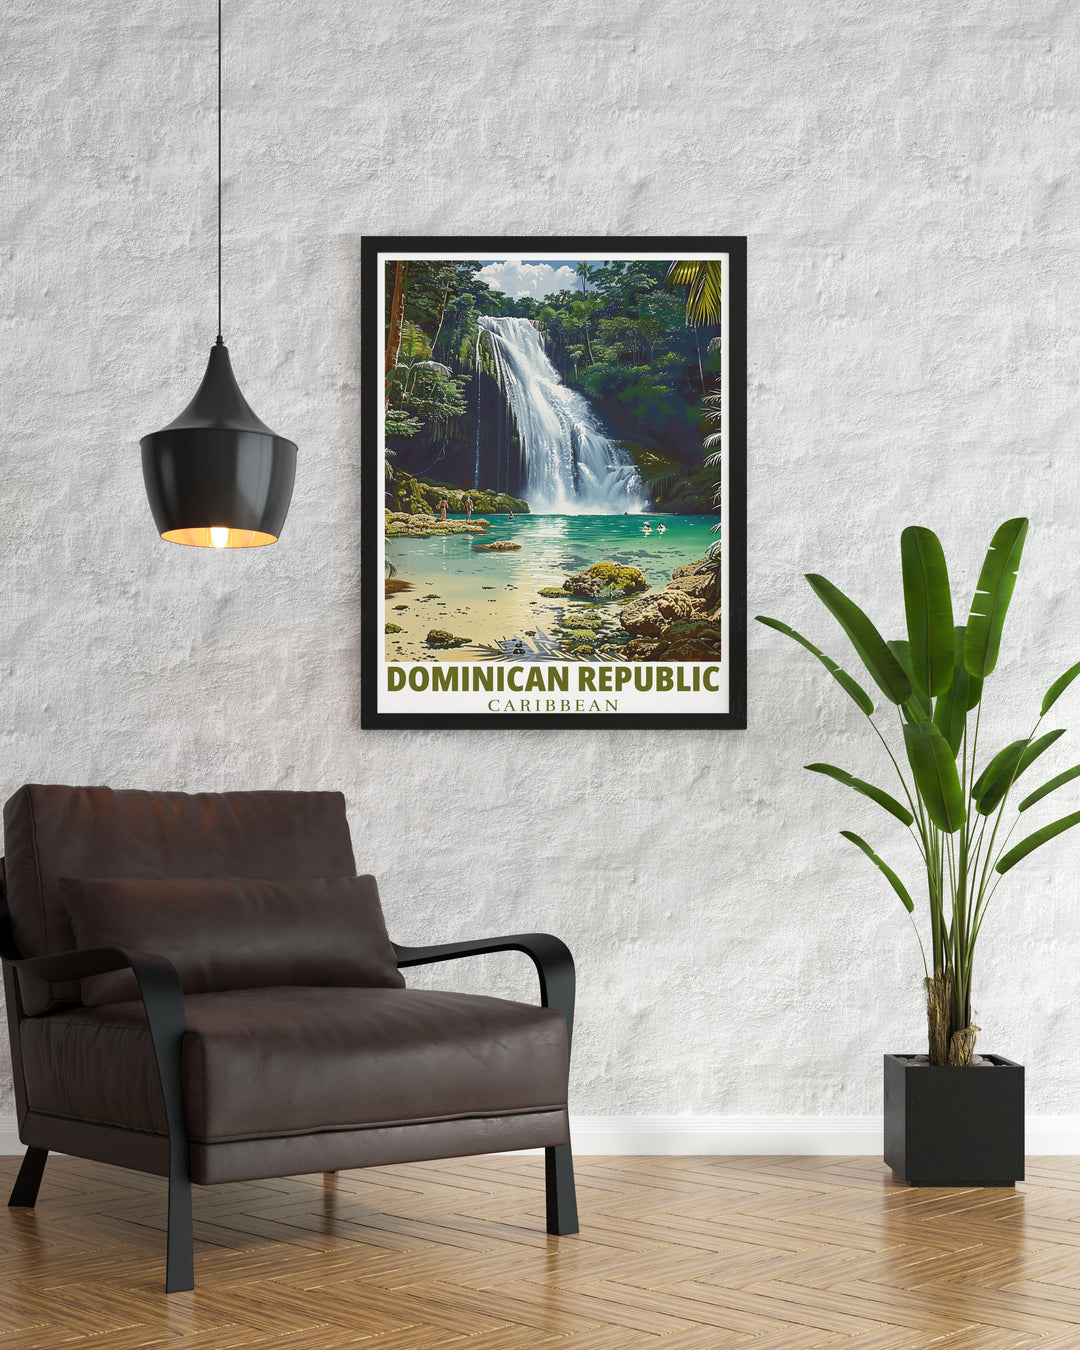 City art print of El Limon Waterfall highlighting the vibrant colors and intricate details of this Dominican gem ideal for enhancing home decor